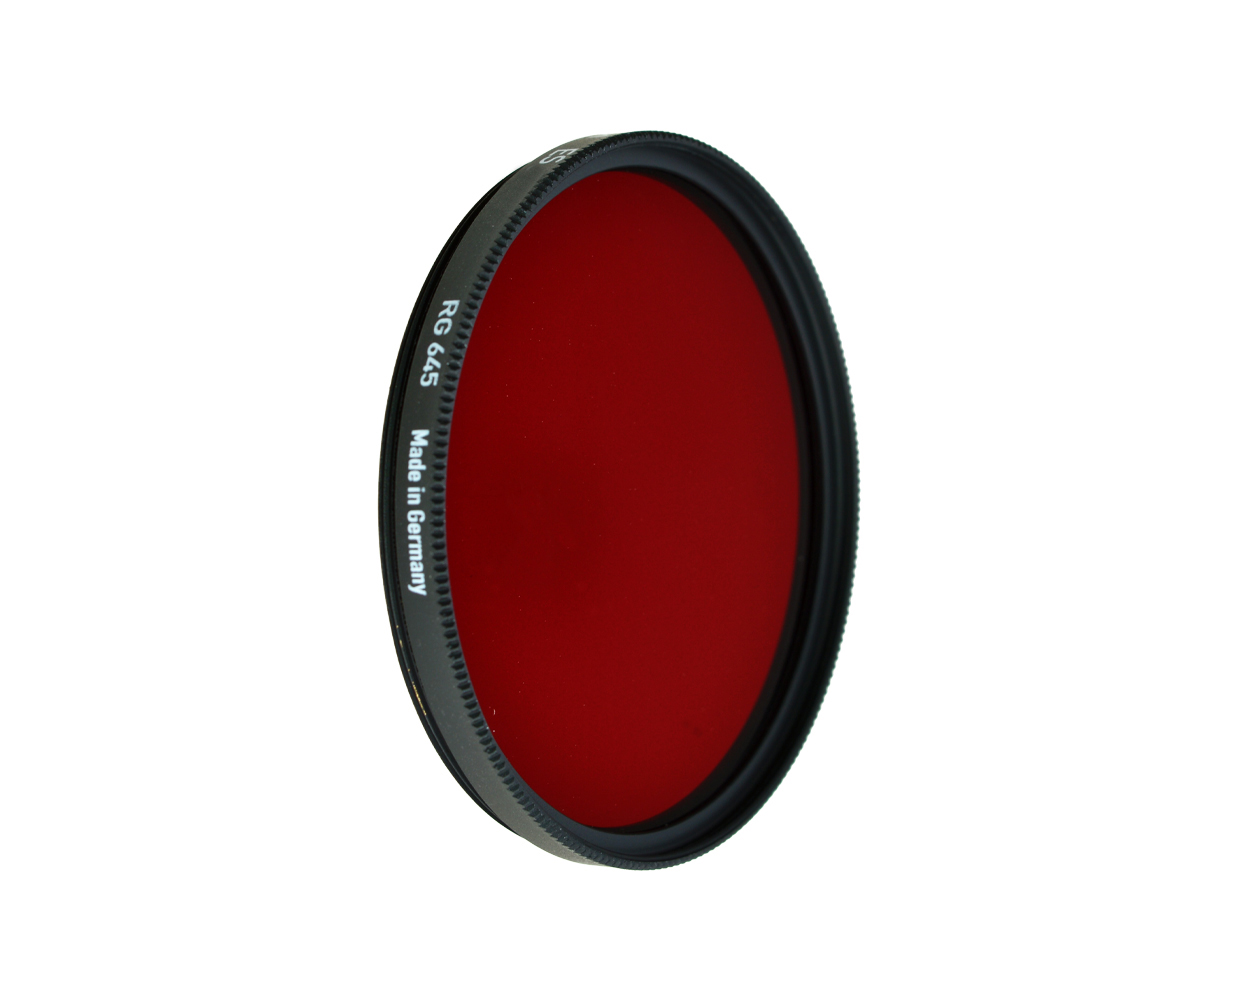 Heliopan infrared filter RG 645 diameter: 72mm (ES72) Infrared Filters  Filters Cameras  Accessories macodirect EN